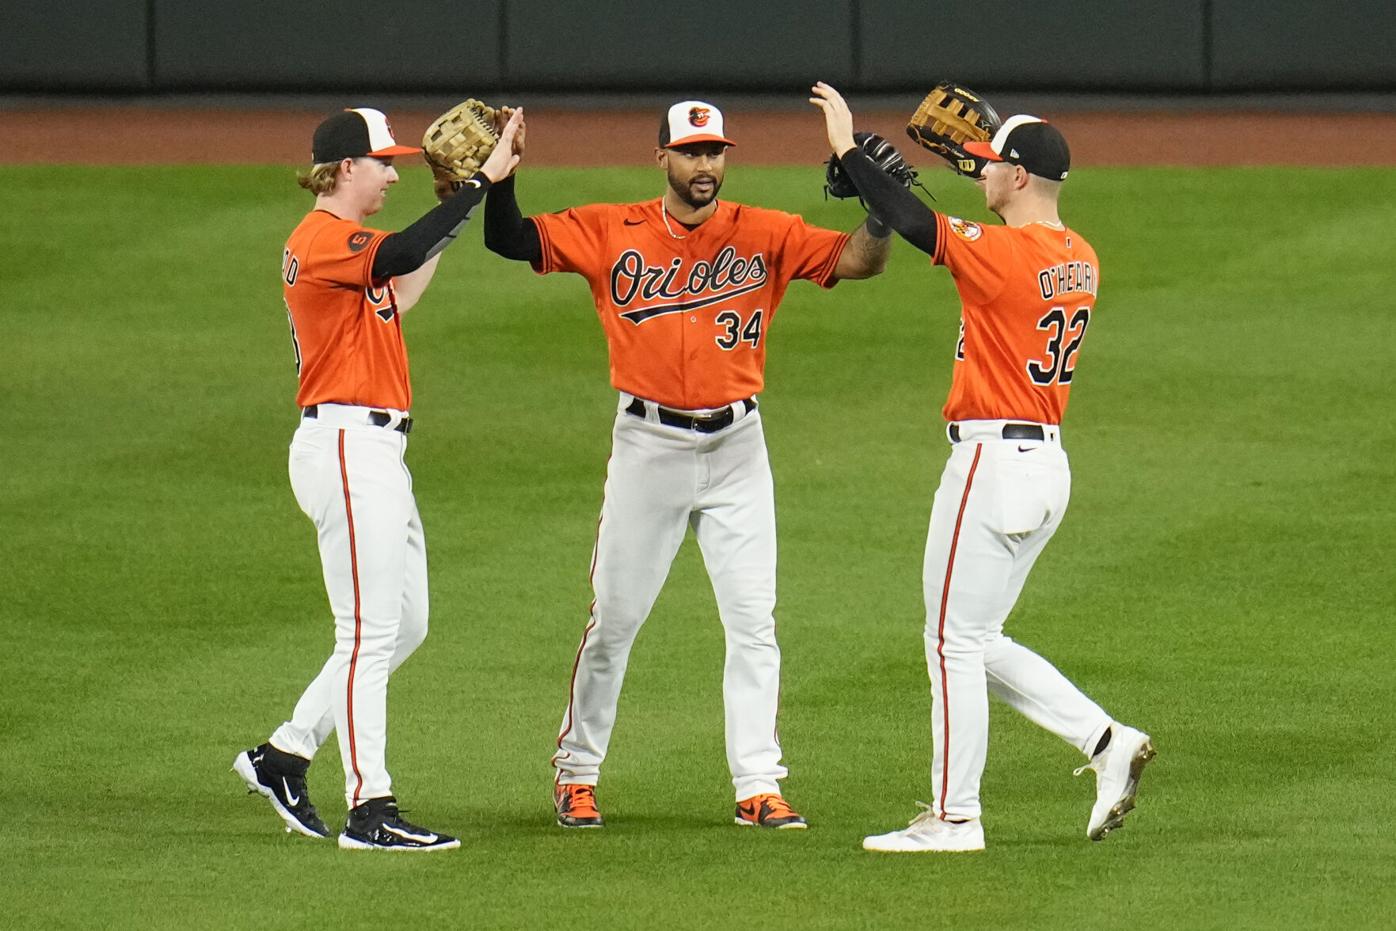 After charmed season in Charm City, O's ready for playoff